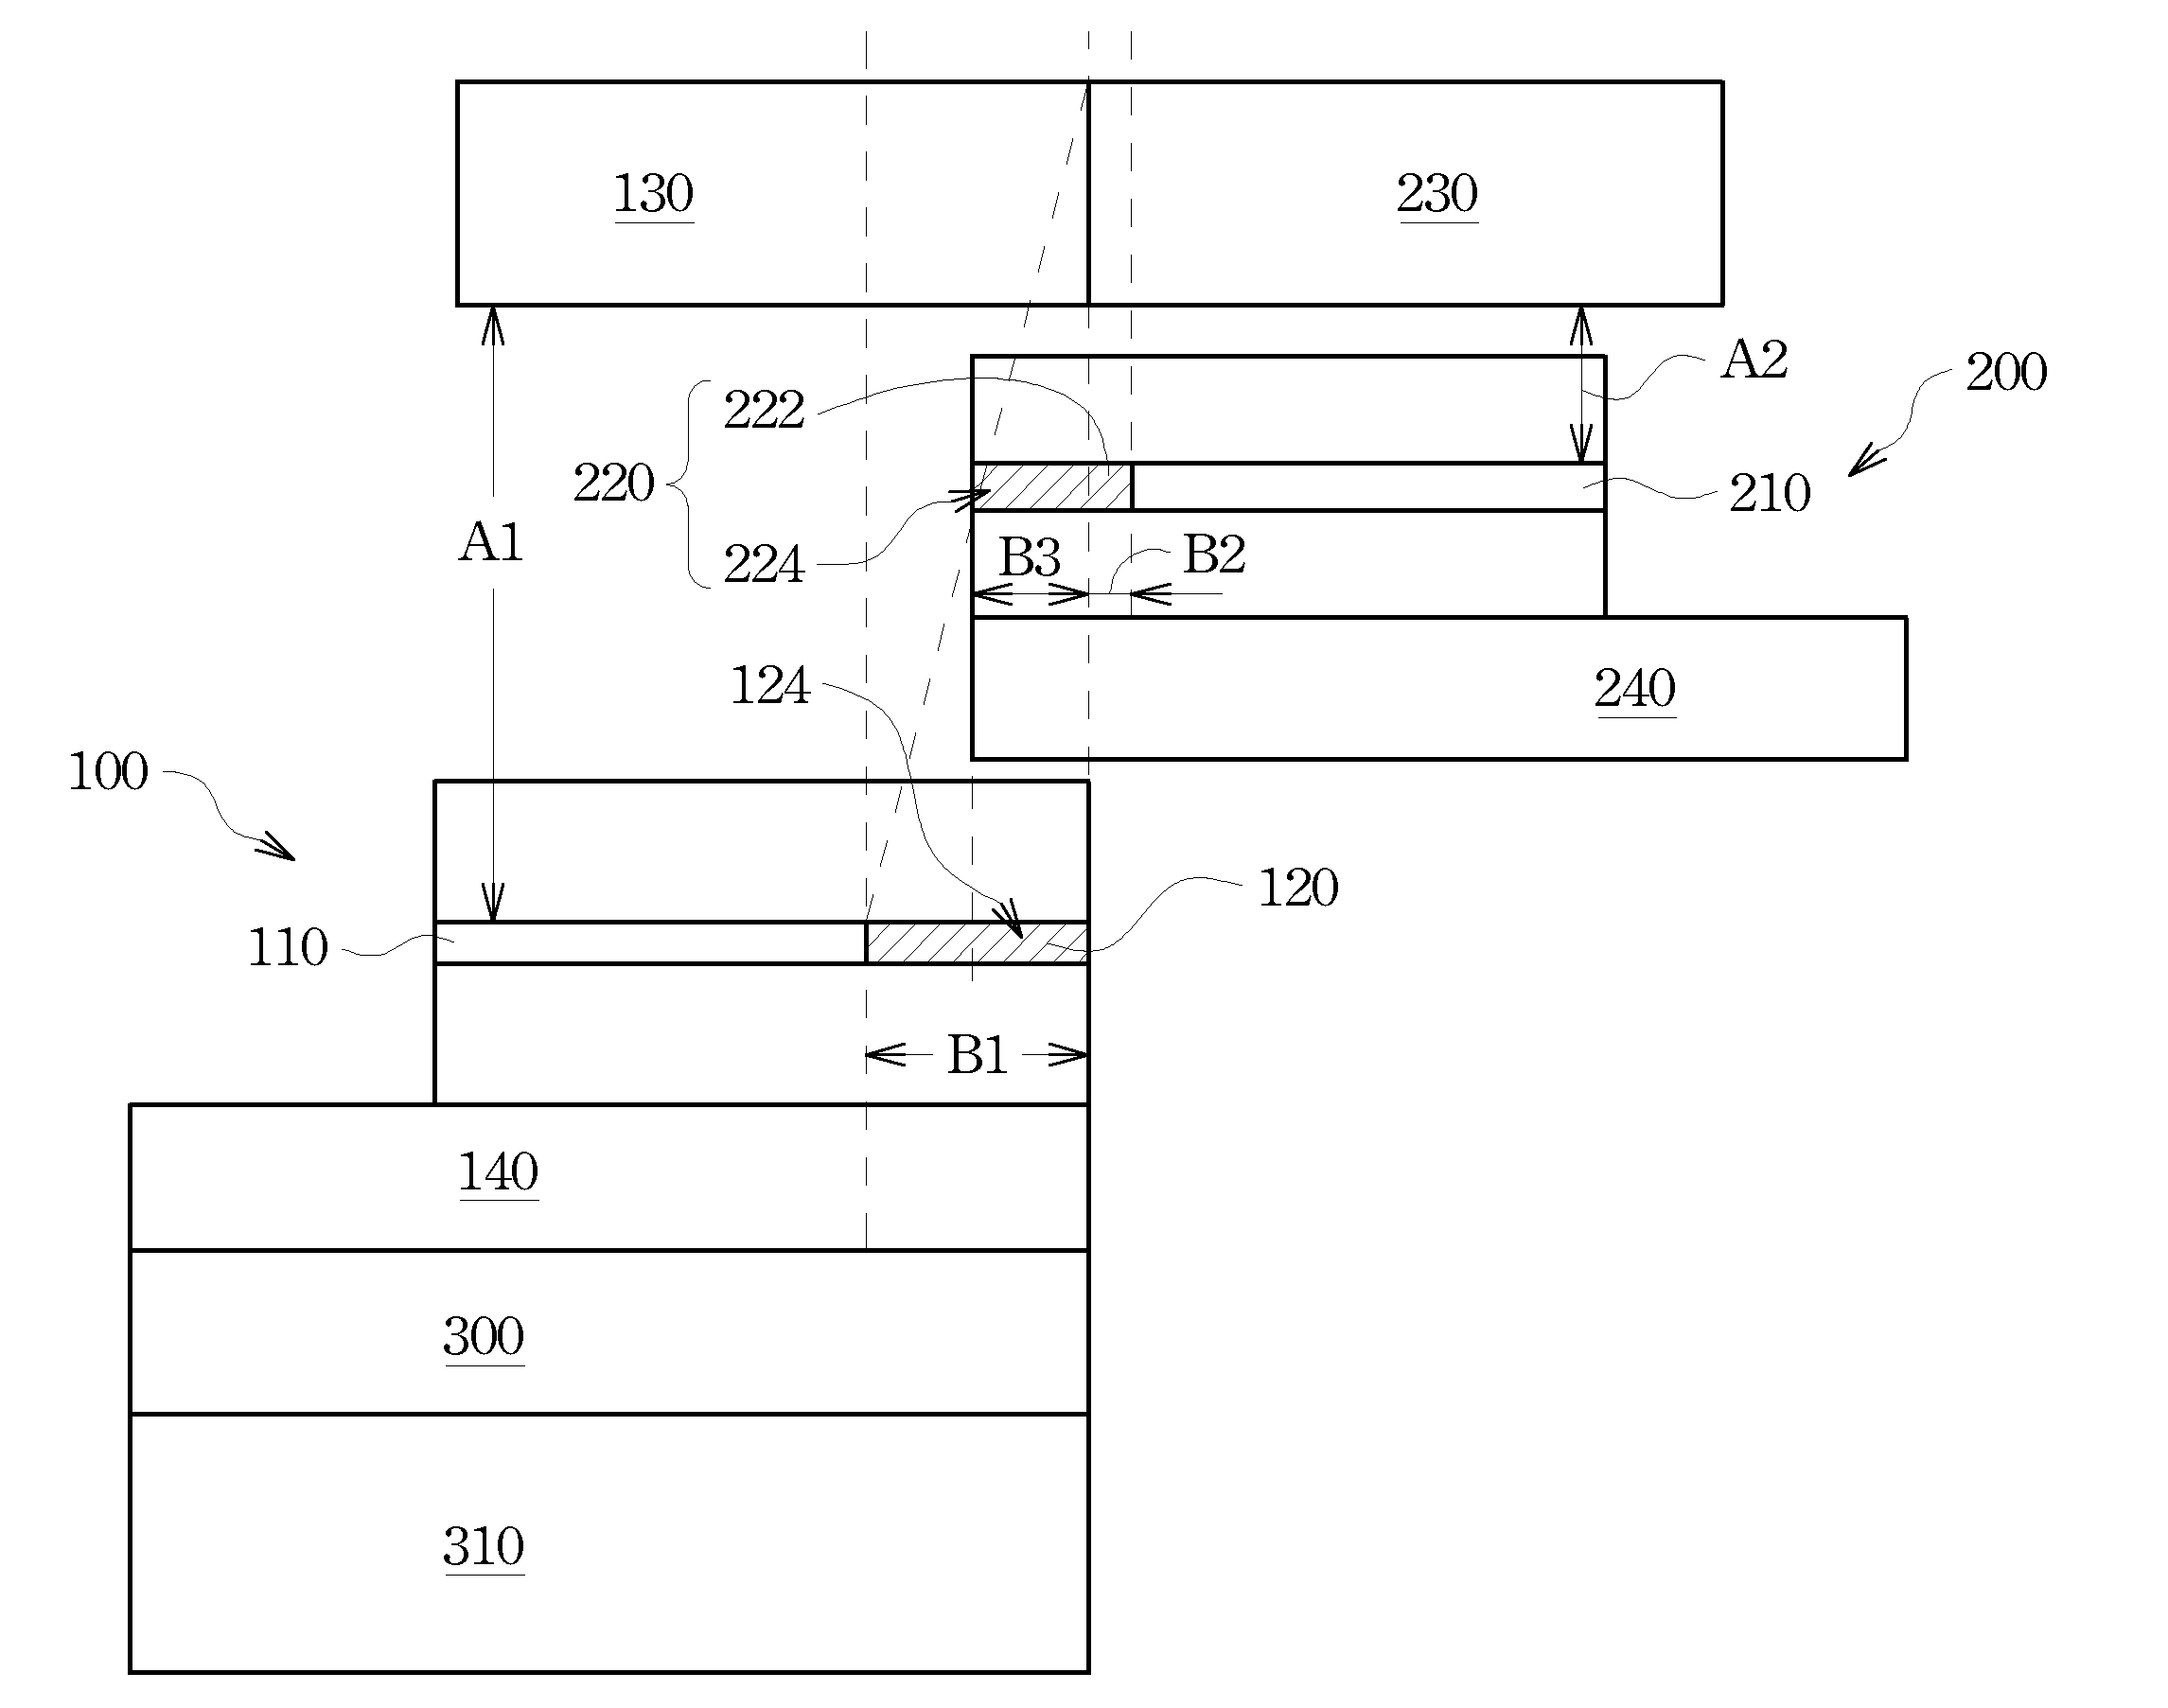 Multi-Section Visual Display having Overlapping Structure